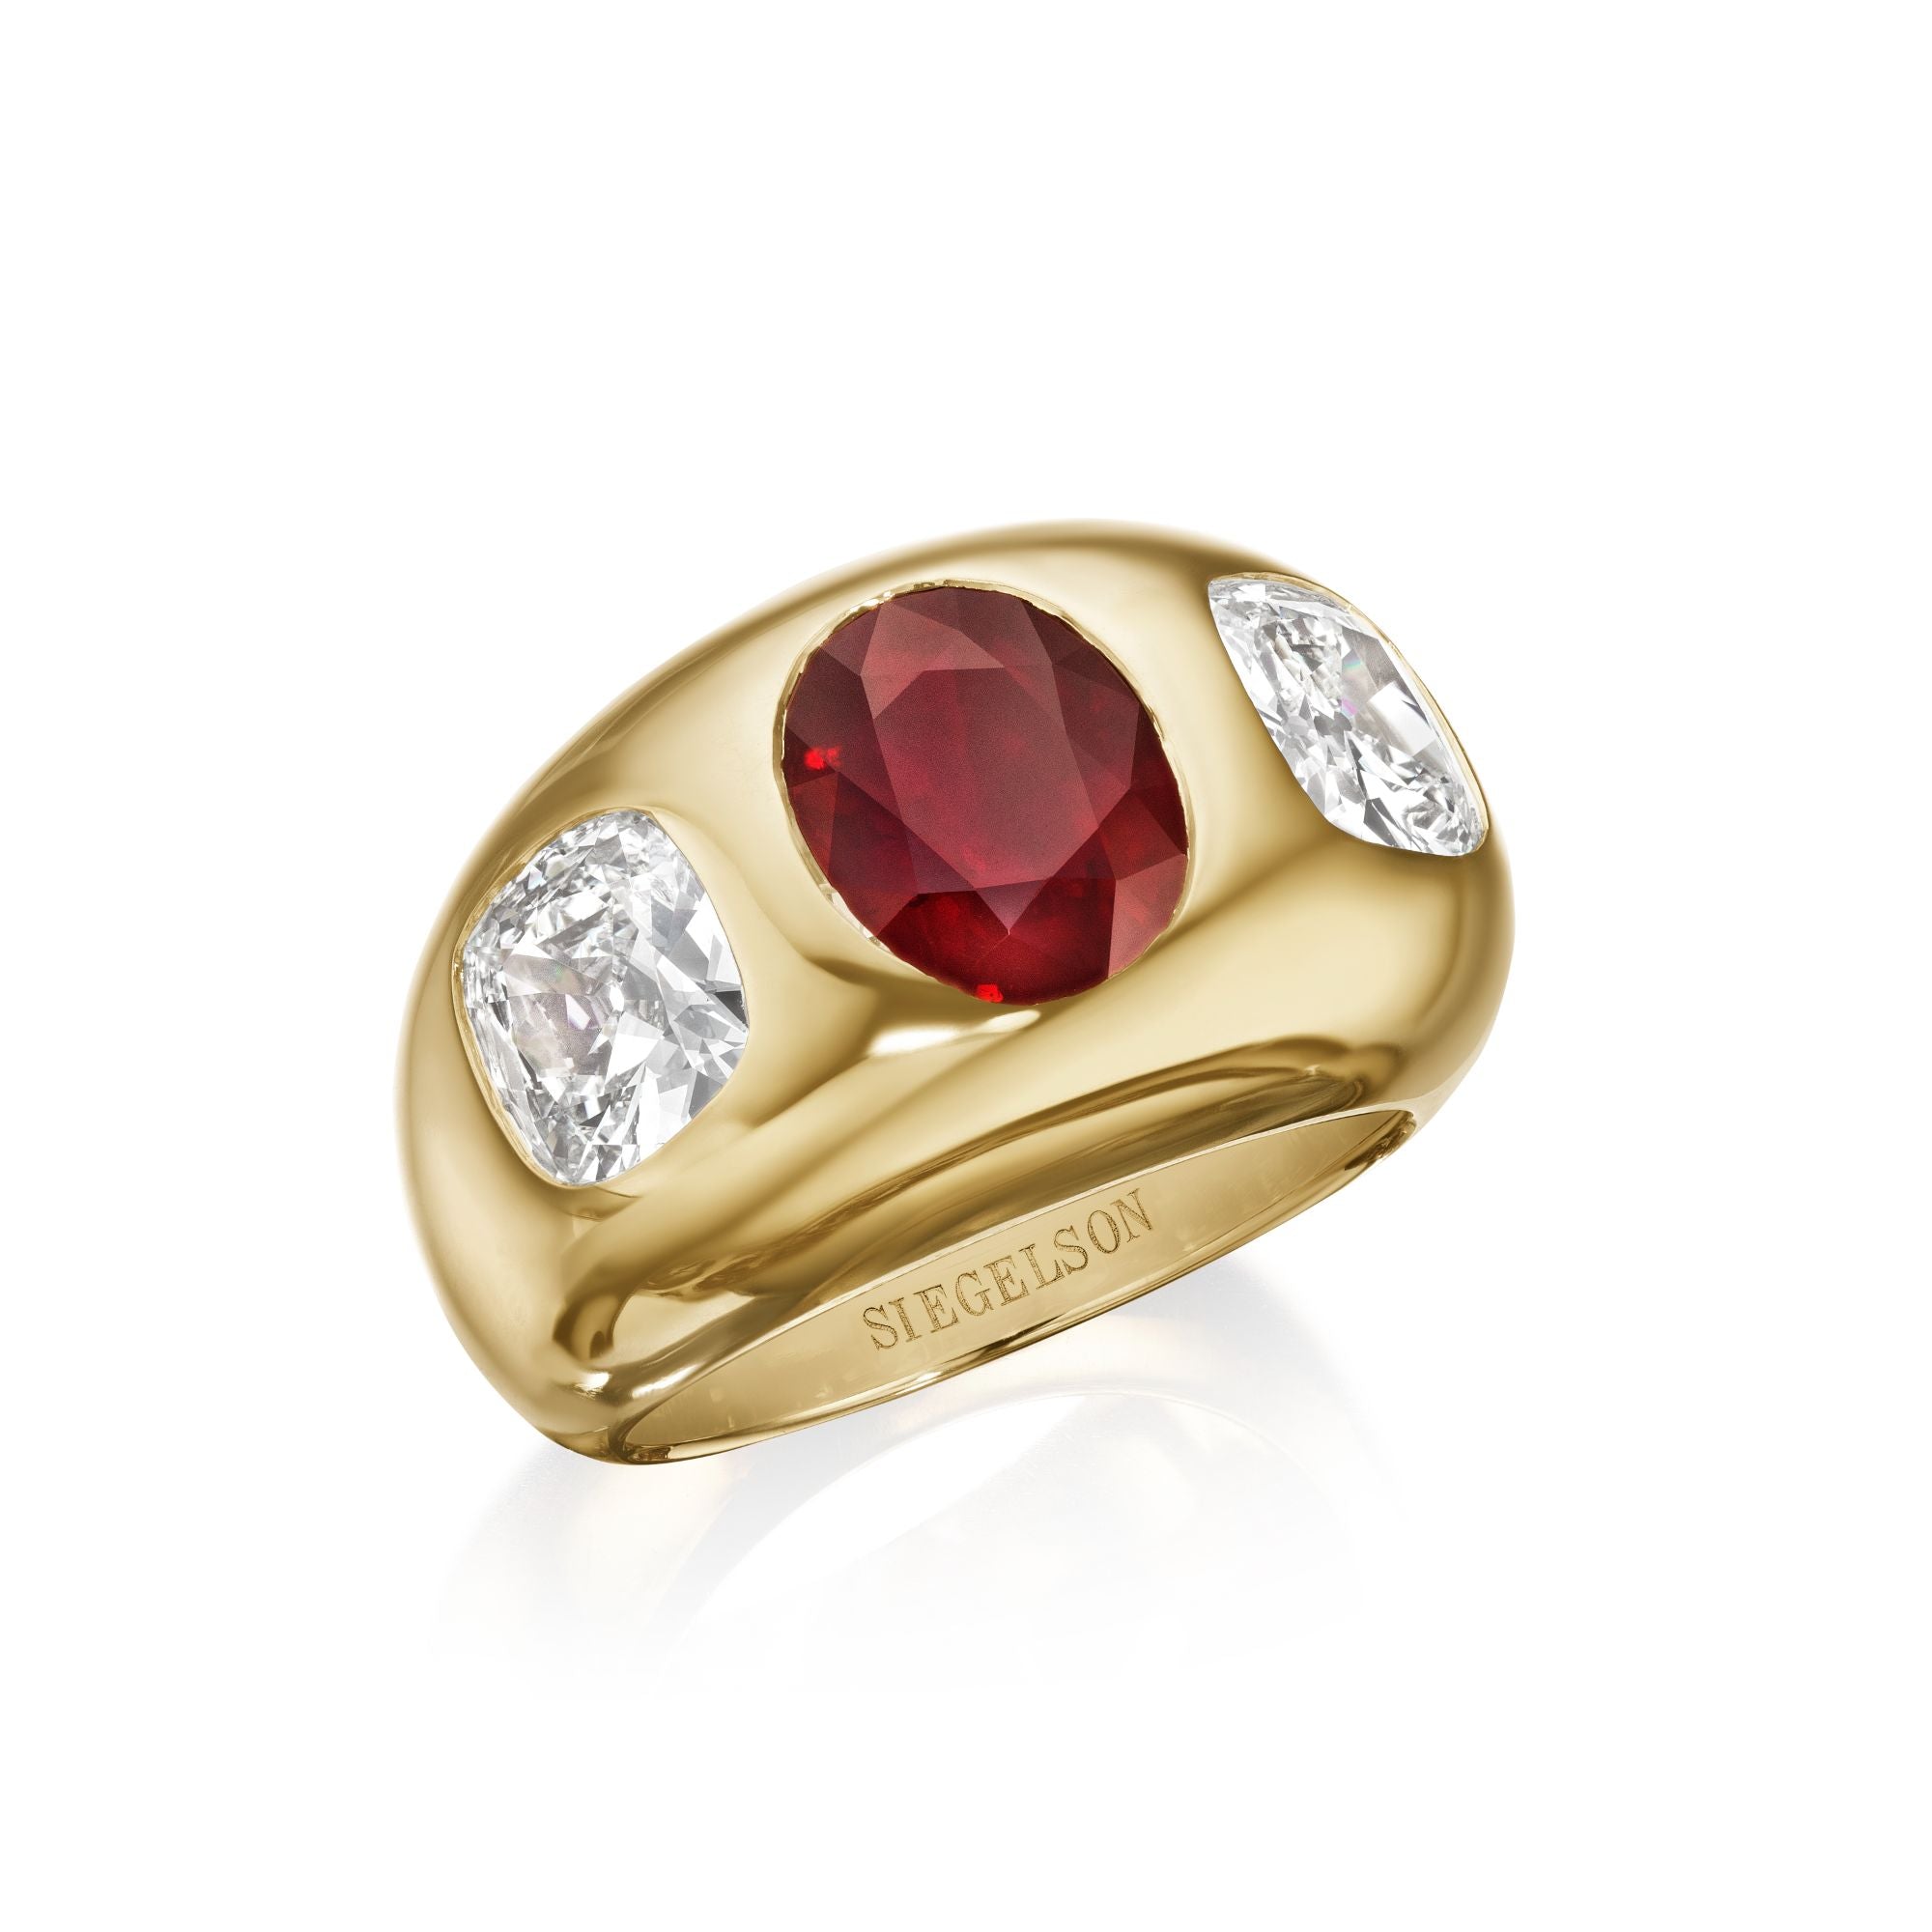 Gold Ruby and Diamond Ring by Siegelson, New York